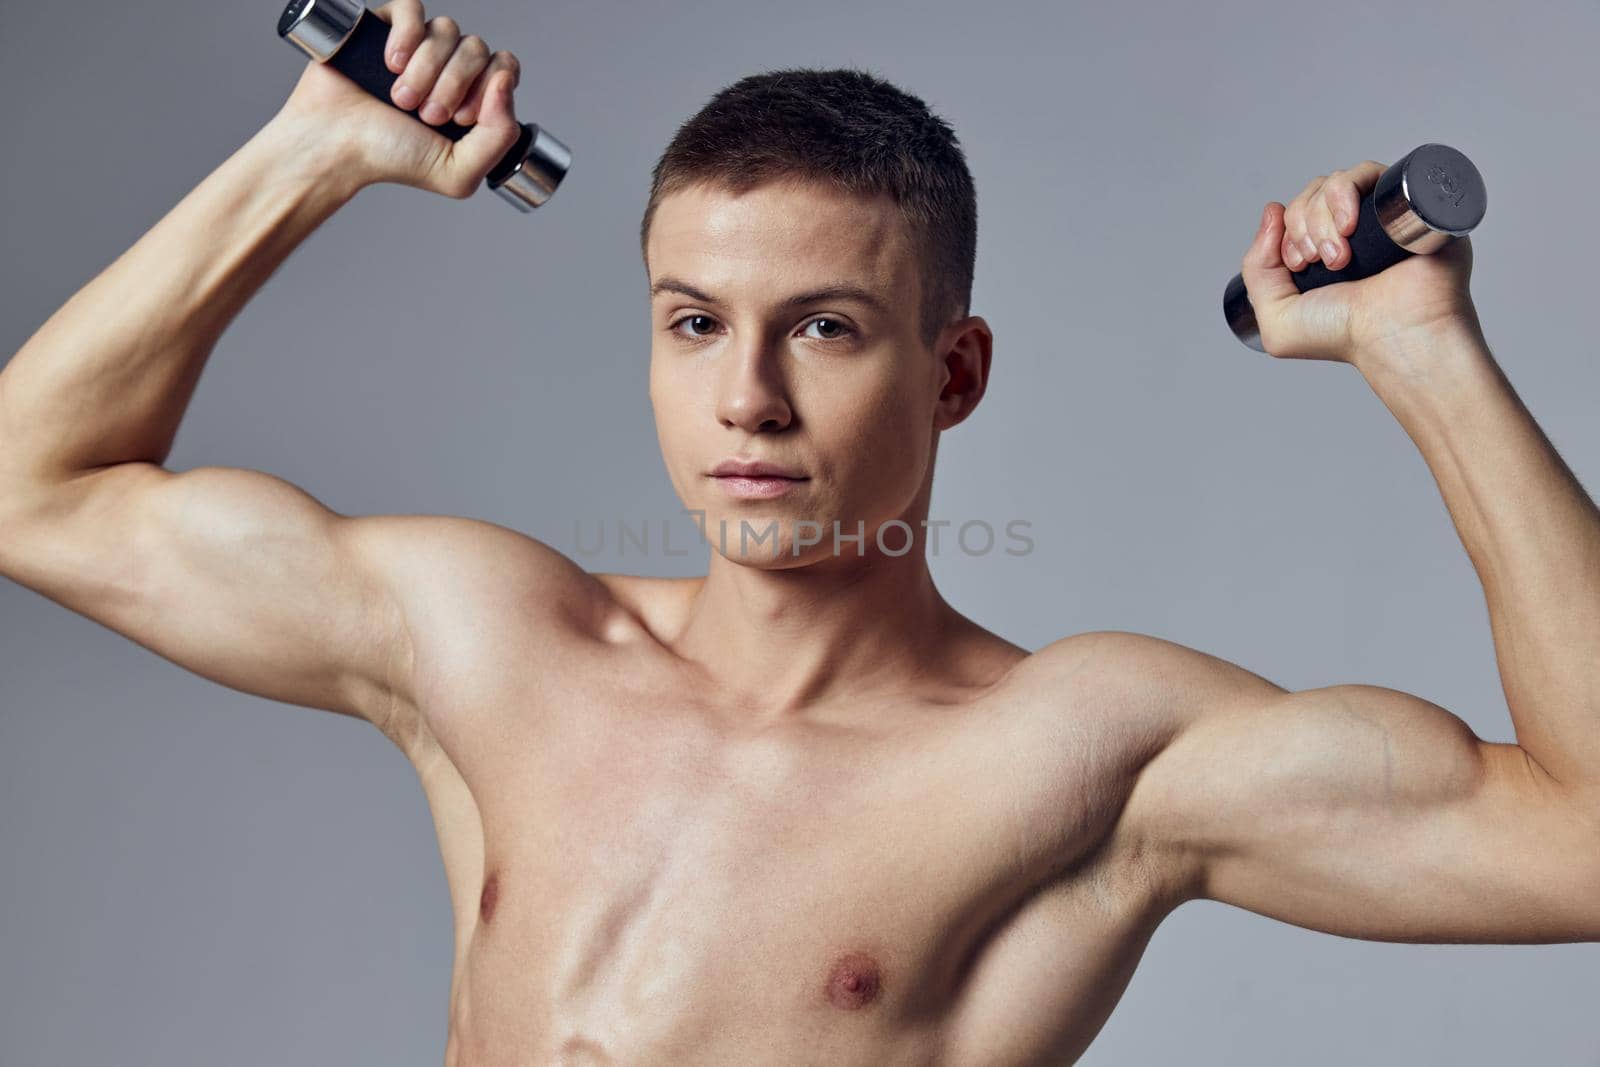 handsome man with a pumped-up body dumbbells in his hands workout muscles by SHOTPRIME